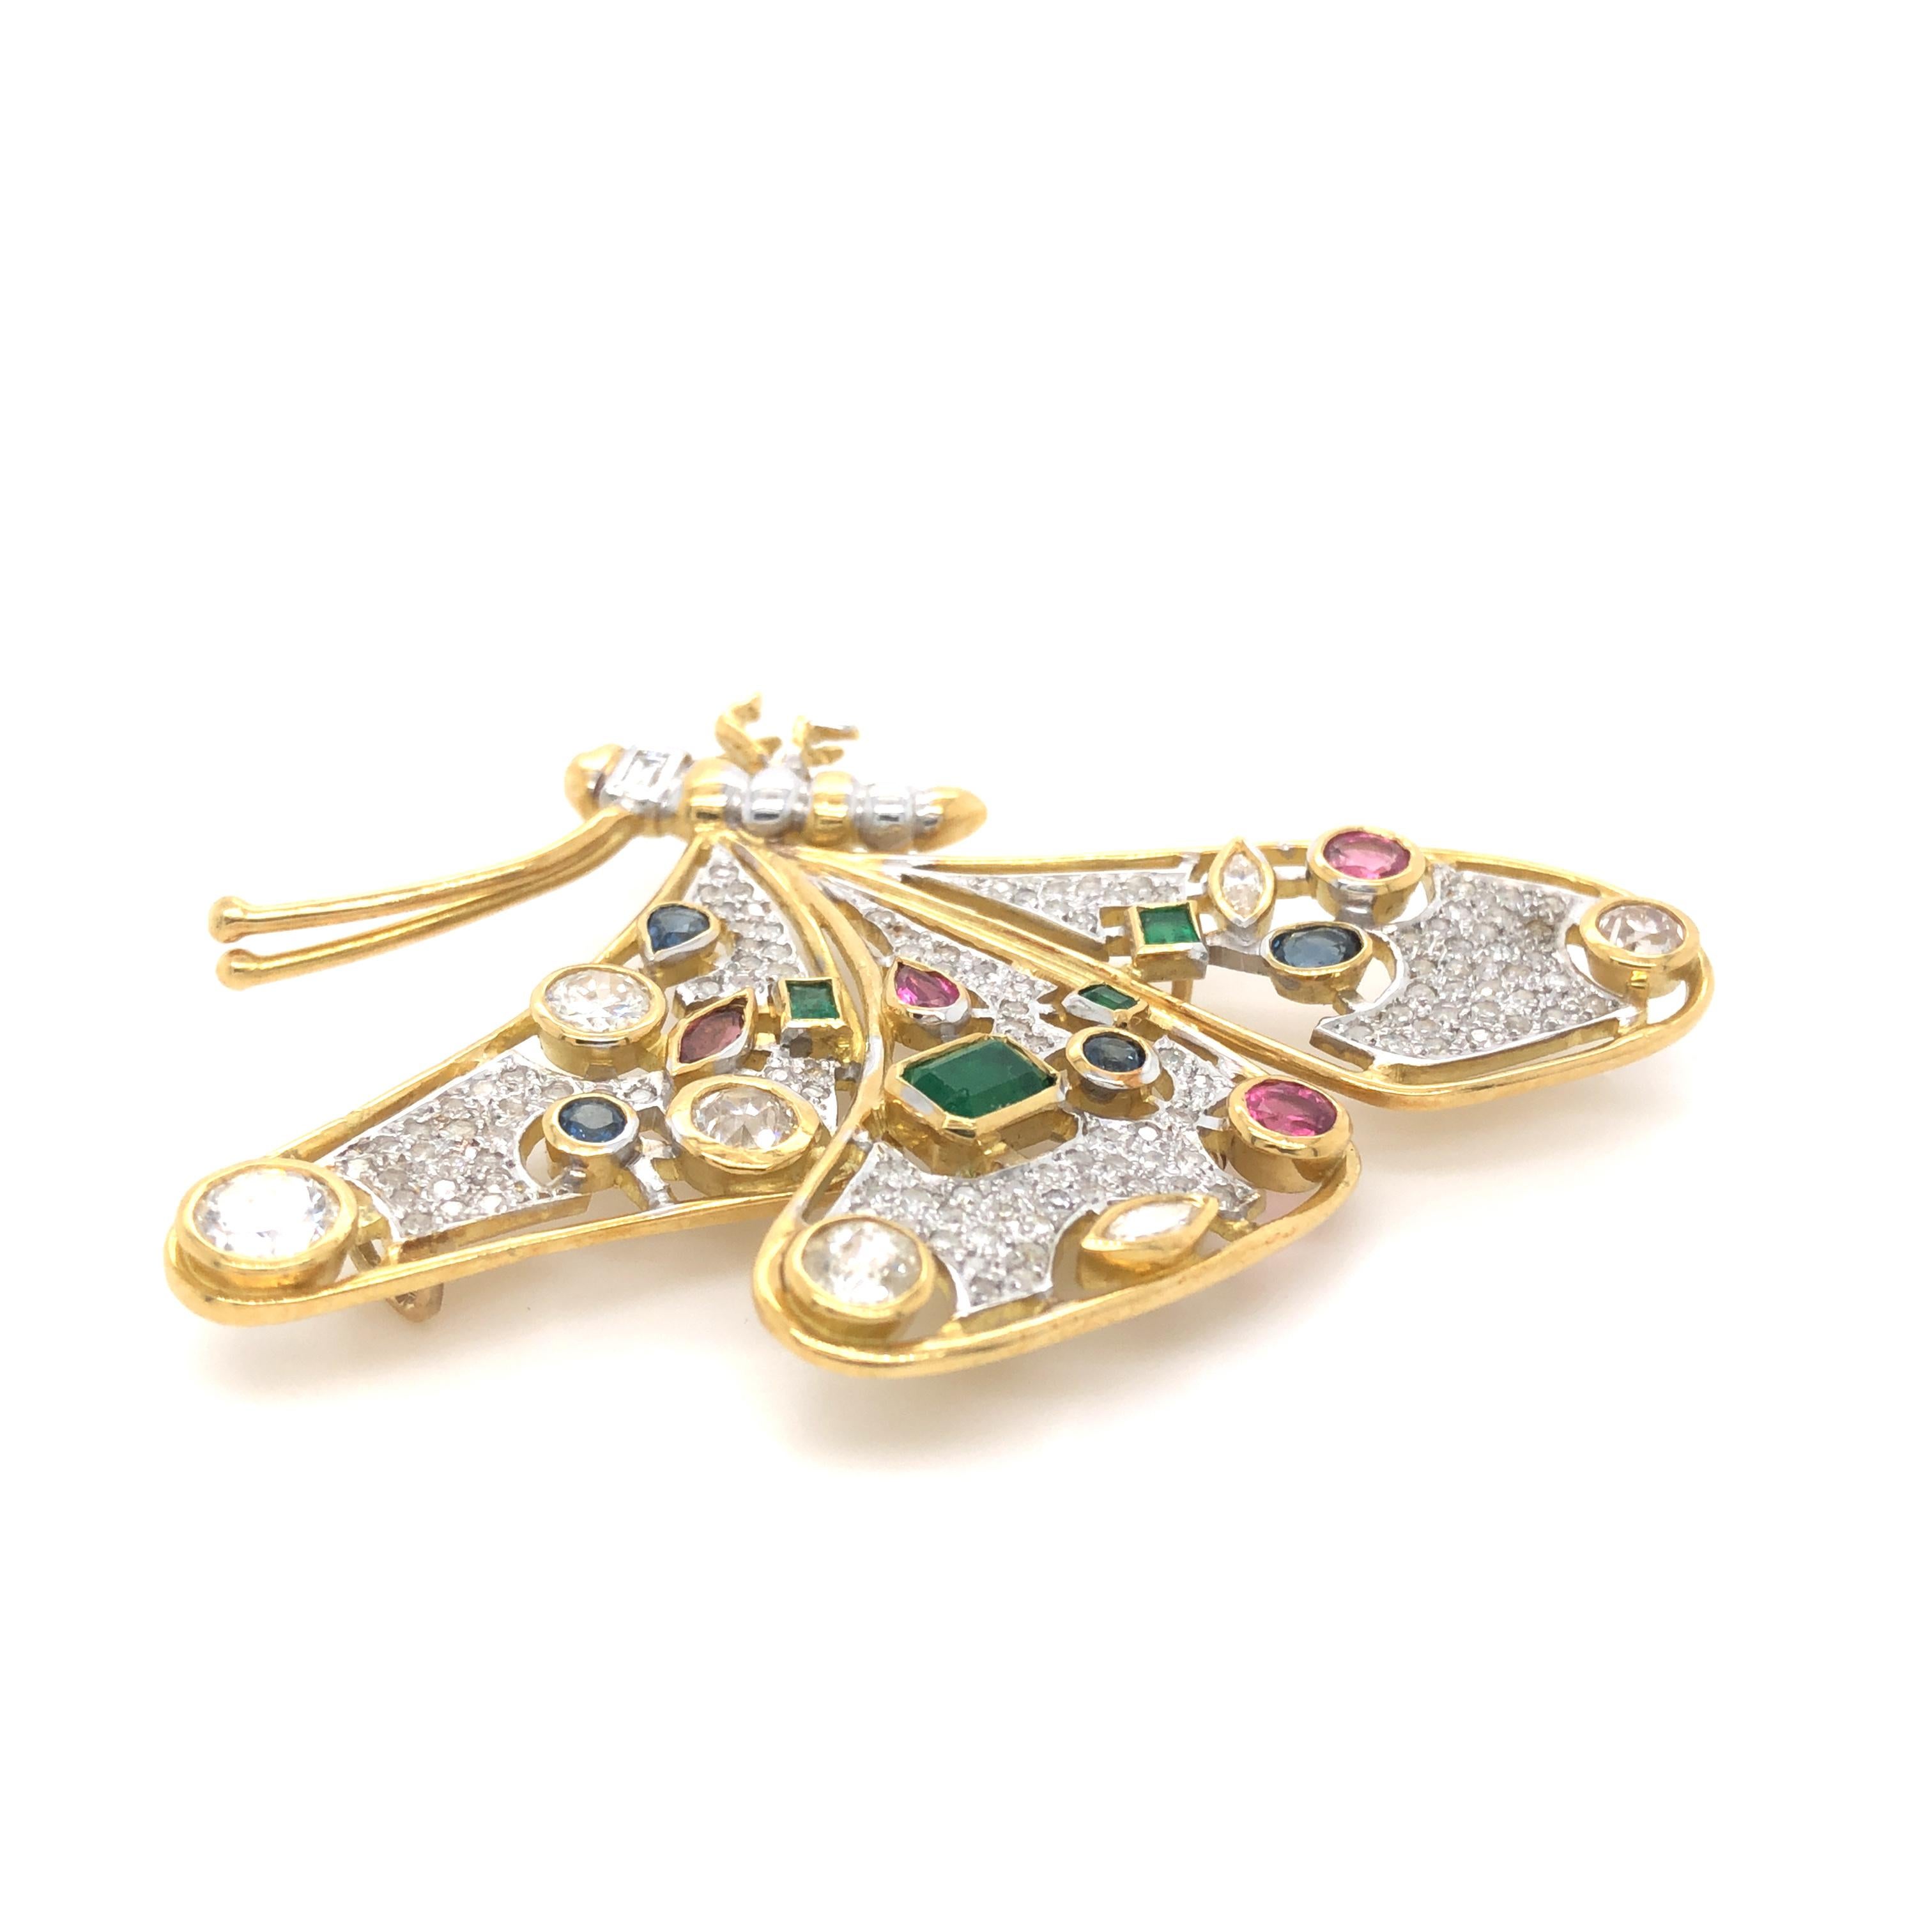 Featuring twenty (20) round brilliant cut, old European cut, marquise, oval,
baguette and pear shaped diamonds, emeralds, sapphires and tourmaline
stones all bezel set in an 18ct yellow gold butterfly brooch, with extra
fittings to make a pendant,